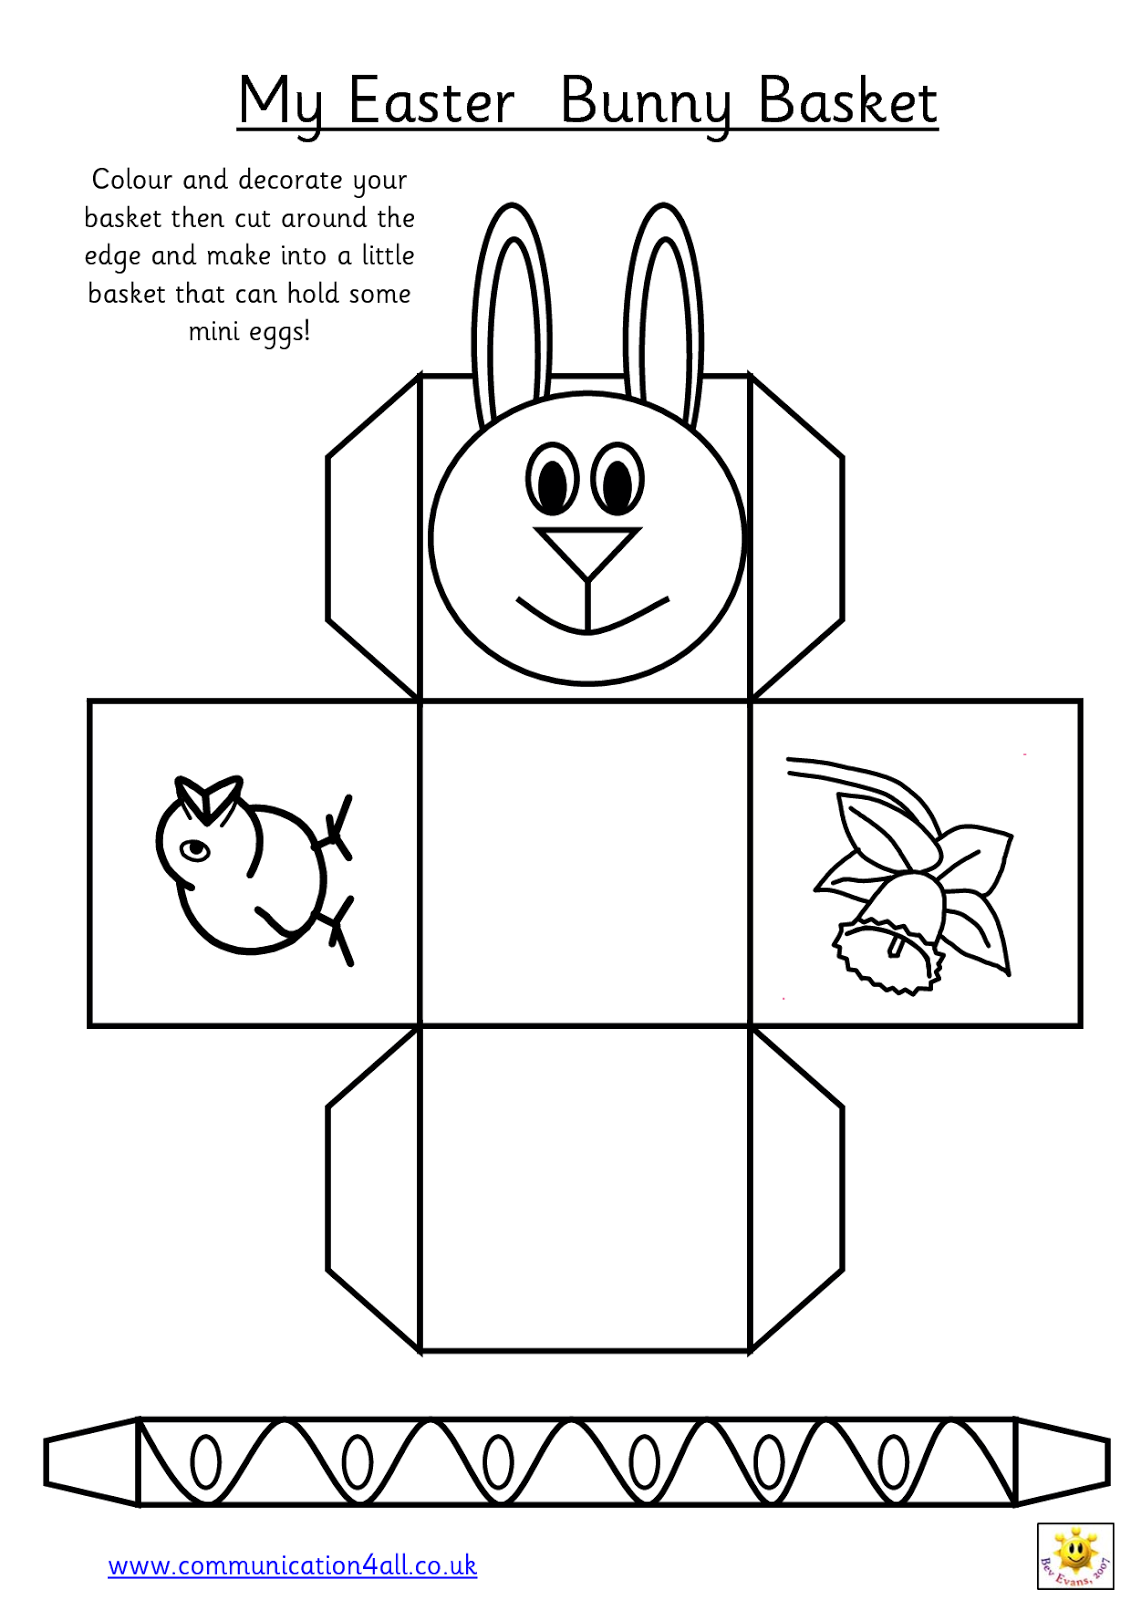 early-play-templates-want-to-make-a-simple-easter-basket-easter-basket-templates